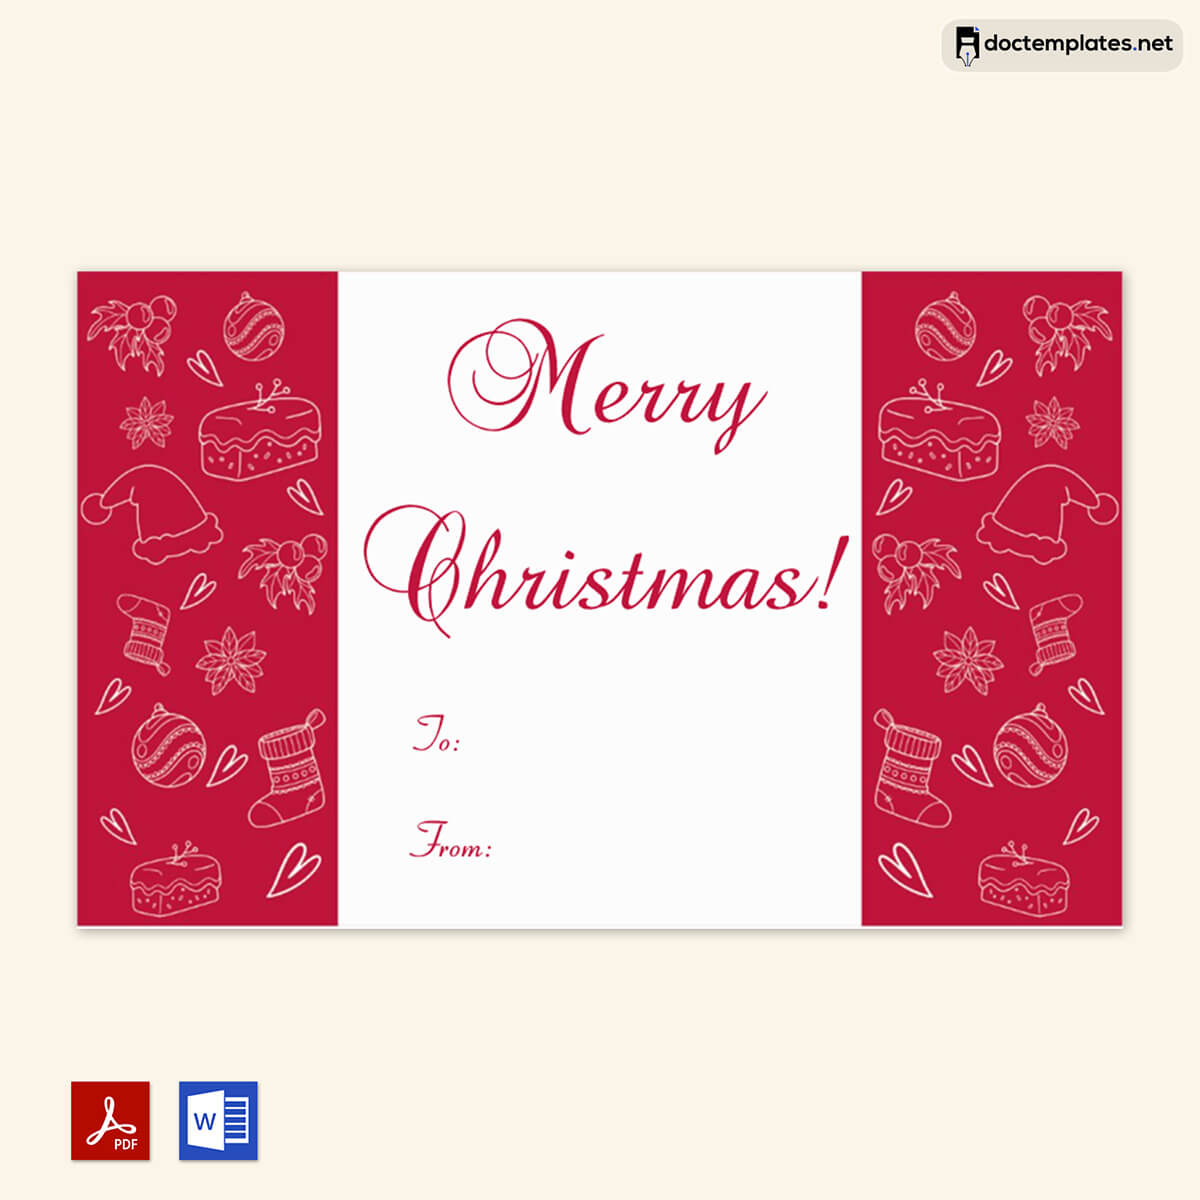 Image of Blank Gift tag Template
Blank Gift tag Template
01